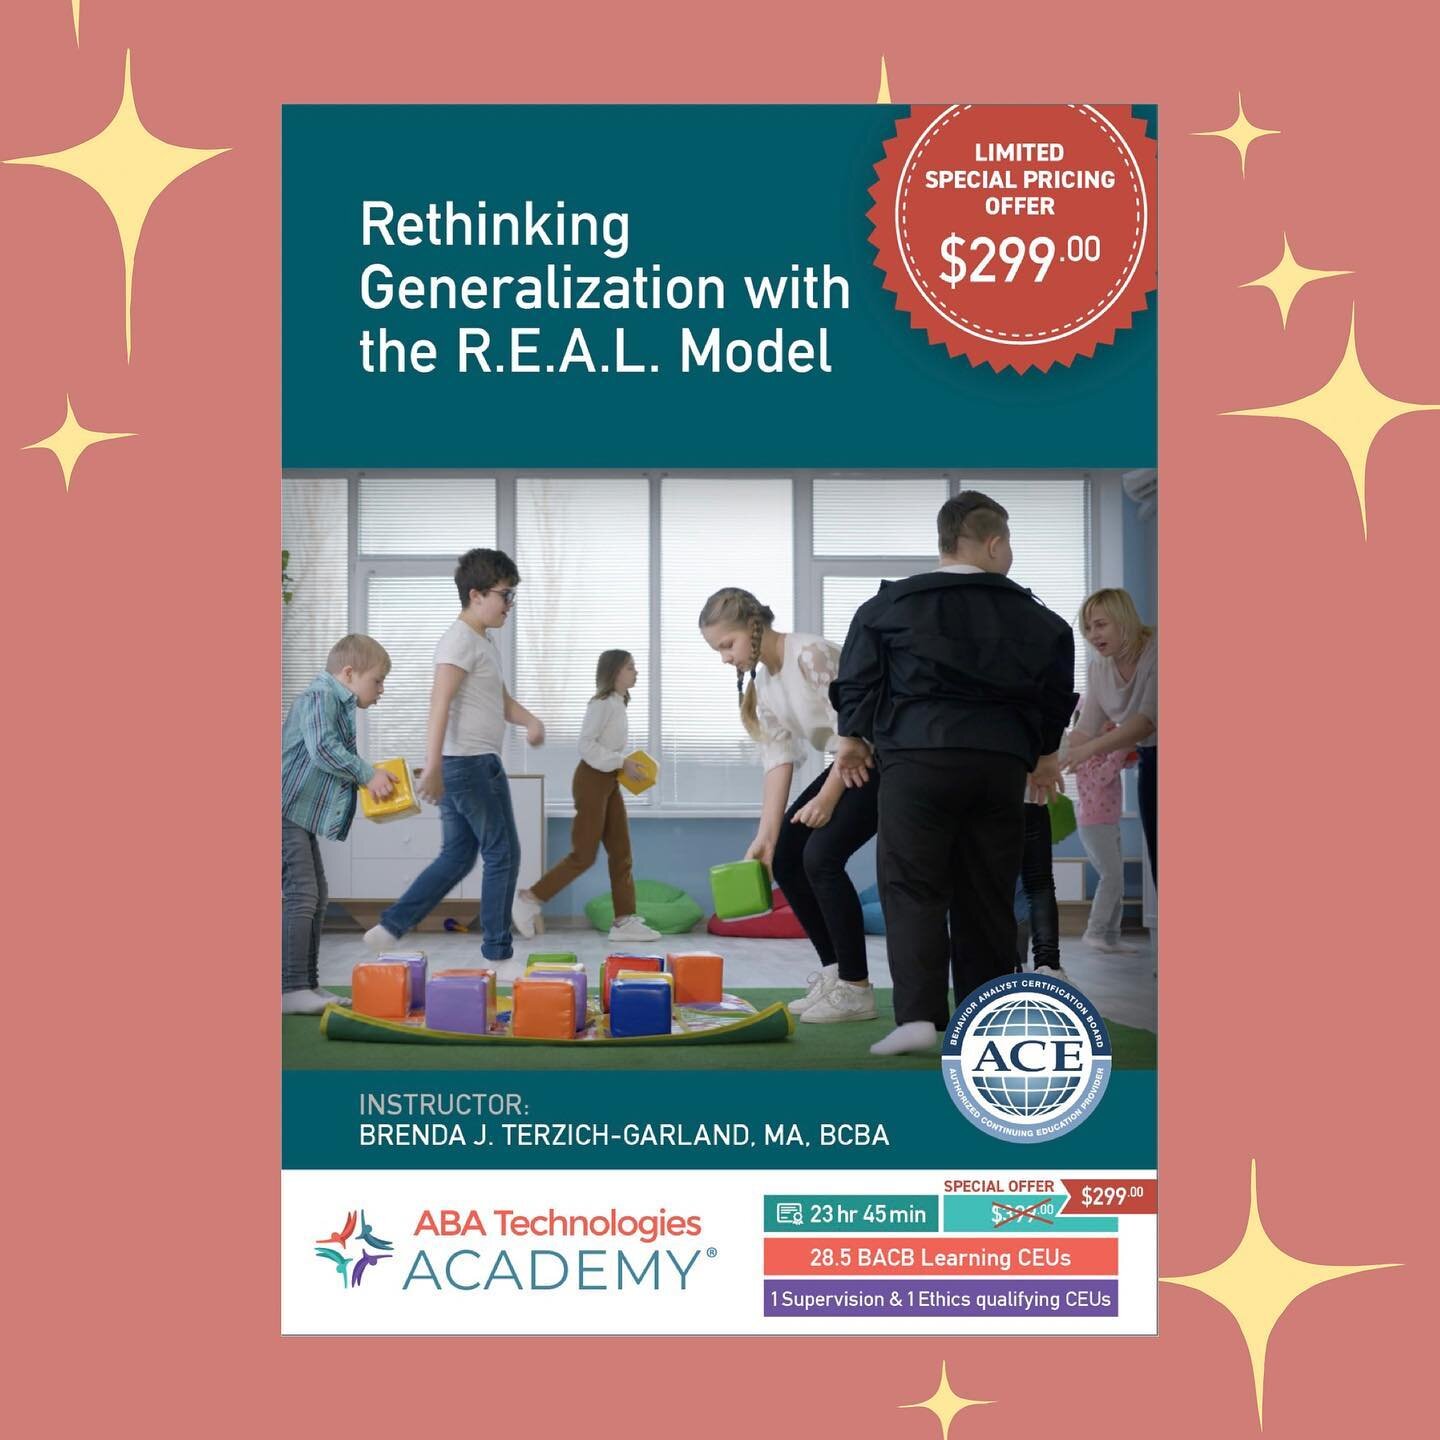 NEW CEU COURSE! ⭐️ 28.75 BACB Learning + 1 Supervision + 1 Ethics CEU

Check out the brand new online course all about the @r.e.a.l.model, put on by @aba_technologies. On sale now for $100 off + 3 free webinars and a discount on the R.E.A.L. guideboo